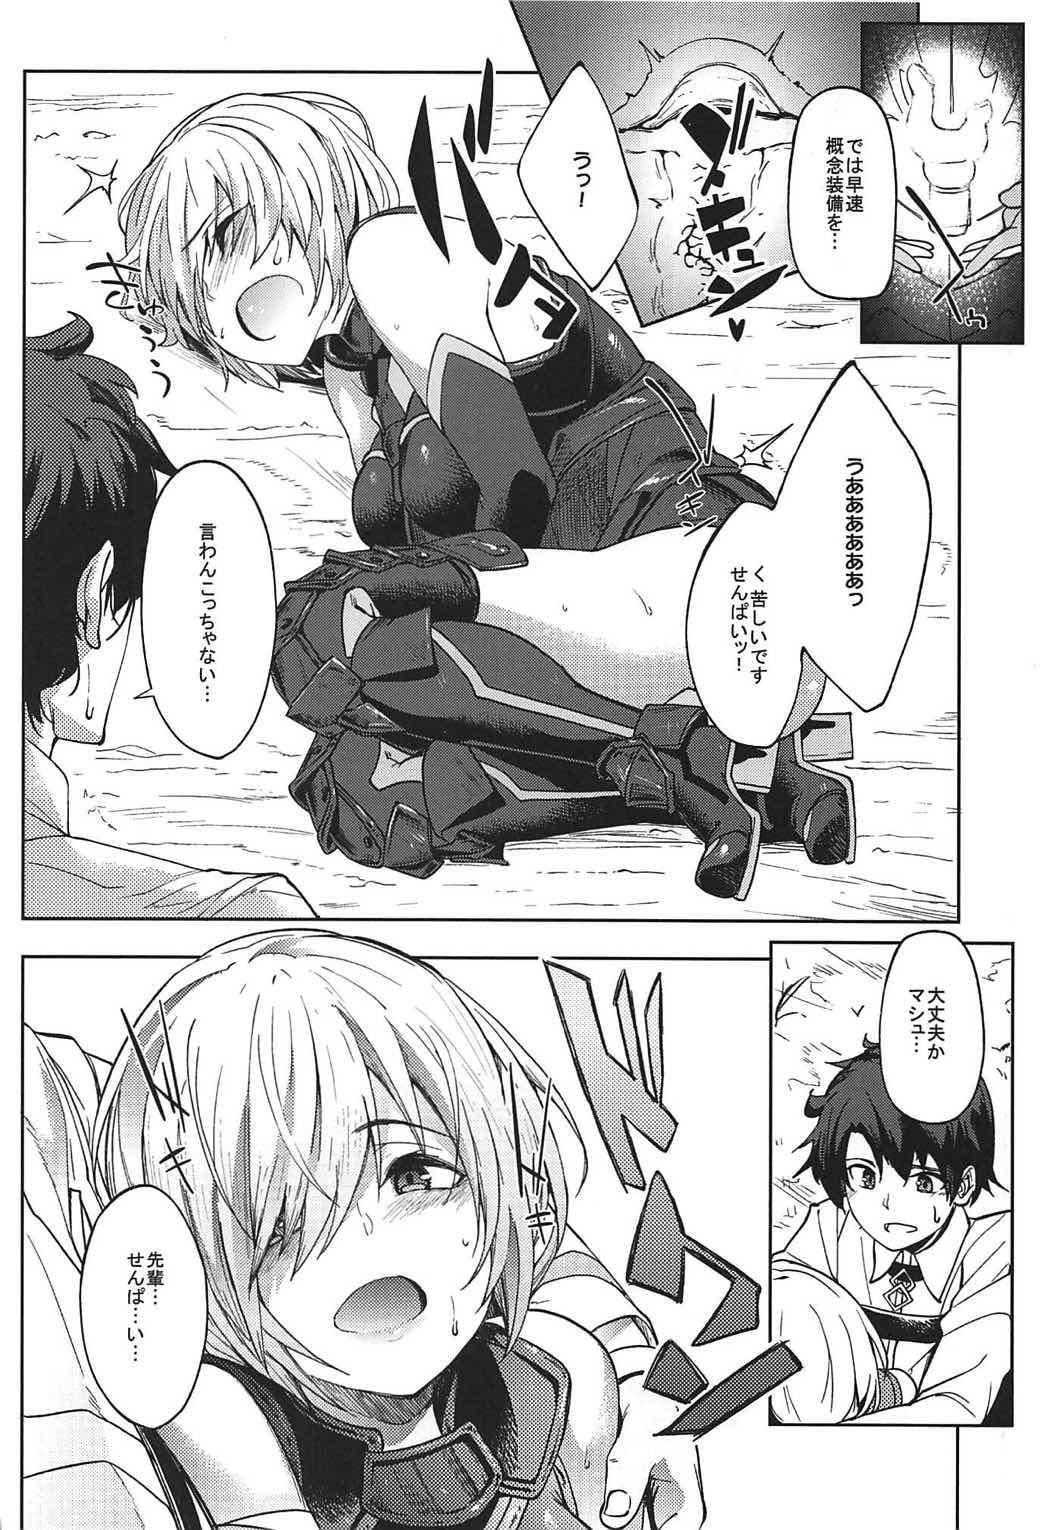 Best Blowjobs Ever Mash to Ecchi Shimashu - Fate grand order Furry - Page 3